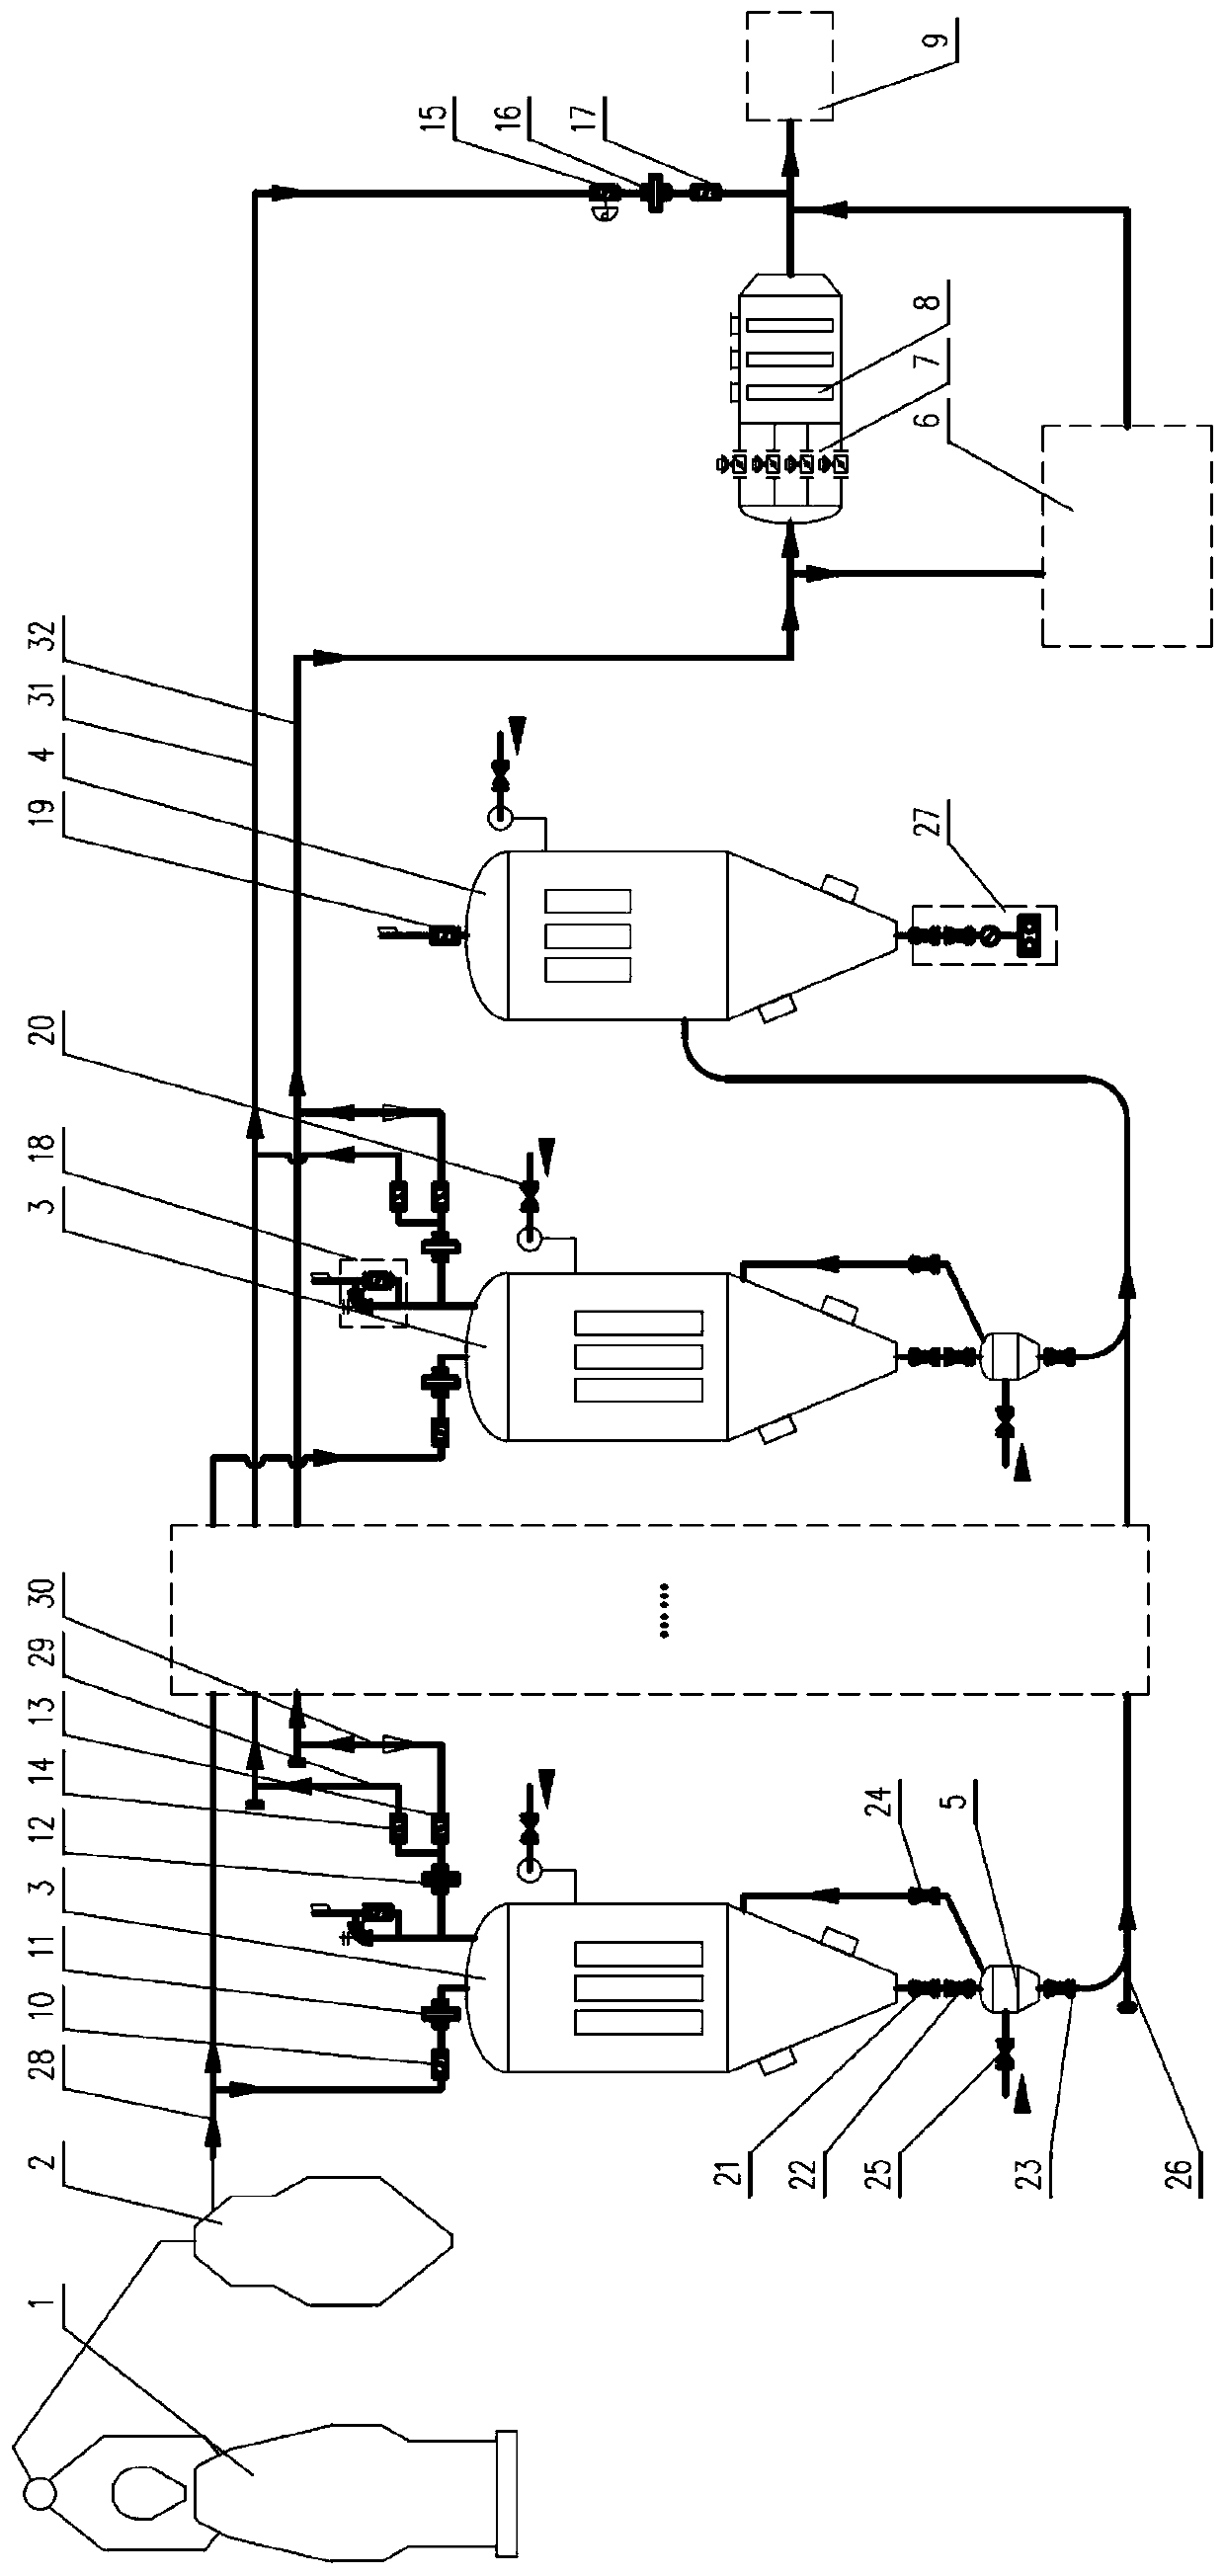 Blast furnace coal gas full-dry purification system and process flow thereof